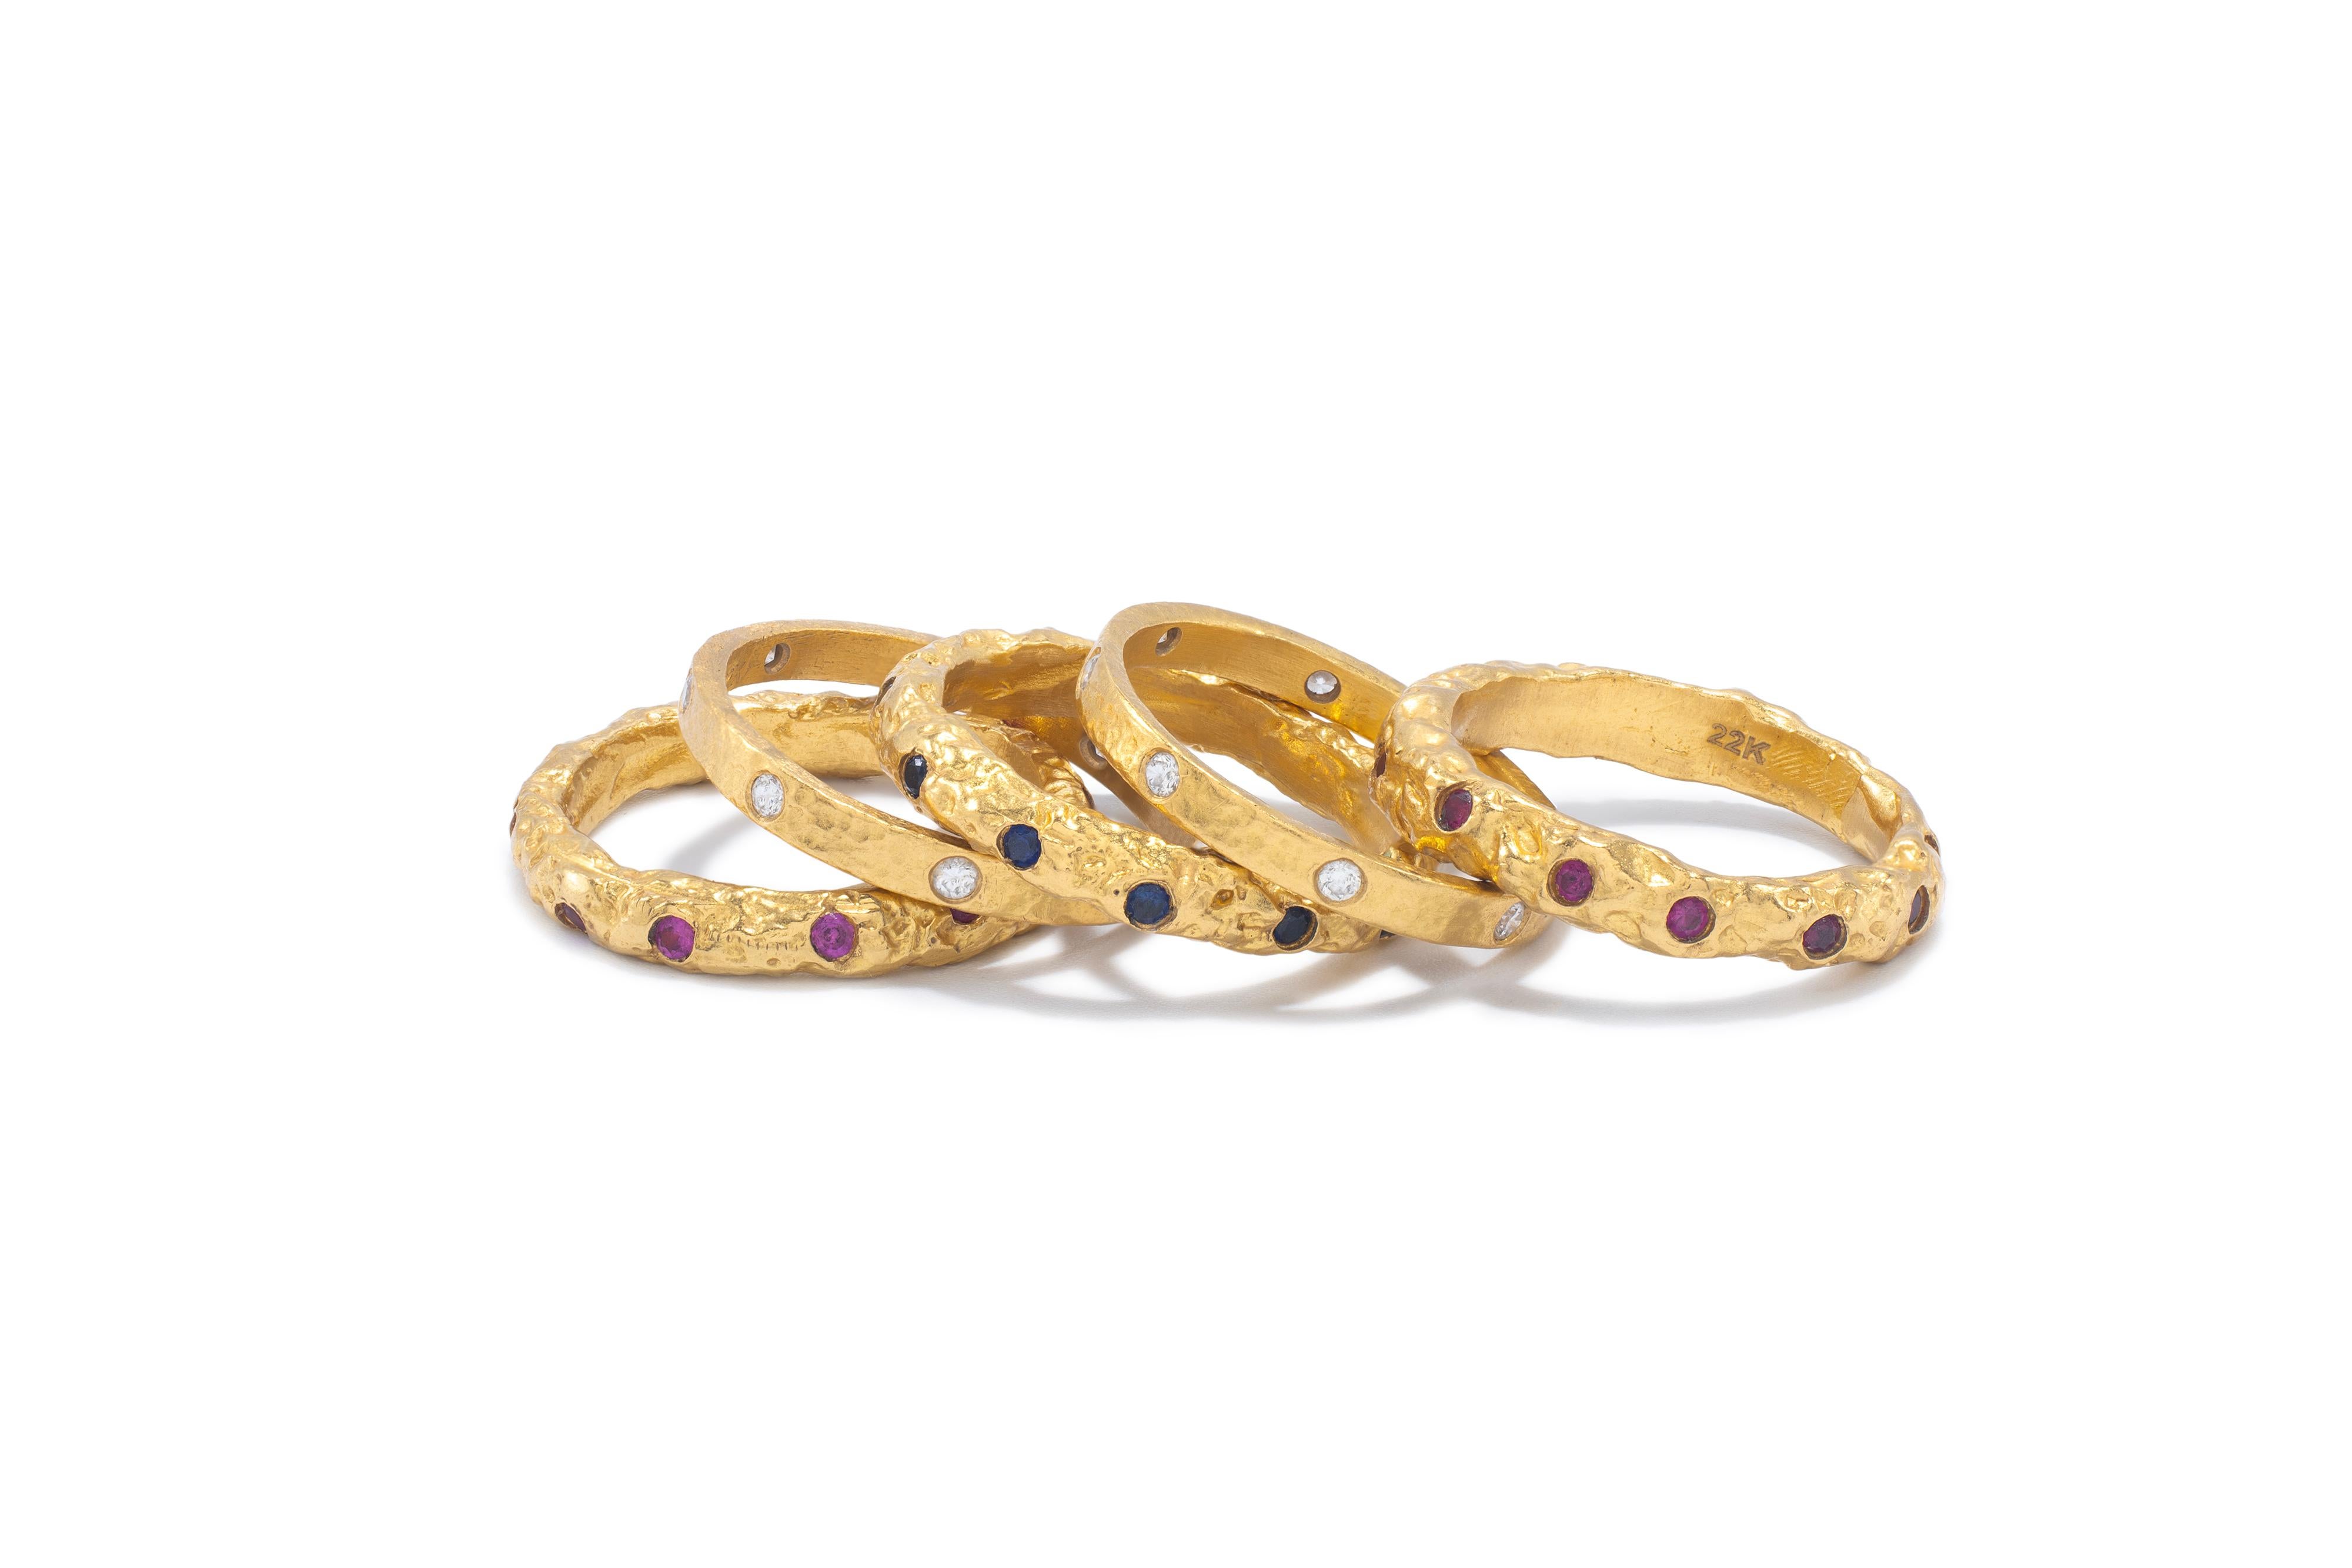 Brilliant Cut 22k Gold Chunky Foil Stacking Rings with Blue Sapphires, by Tagili For Sale